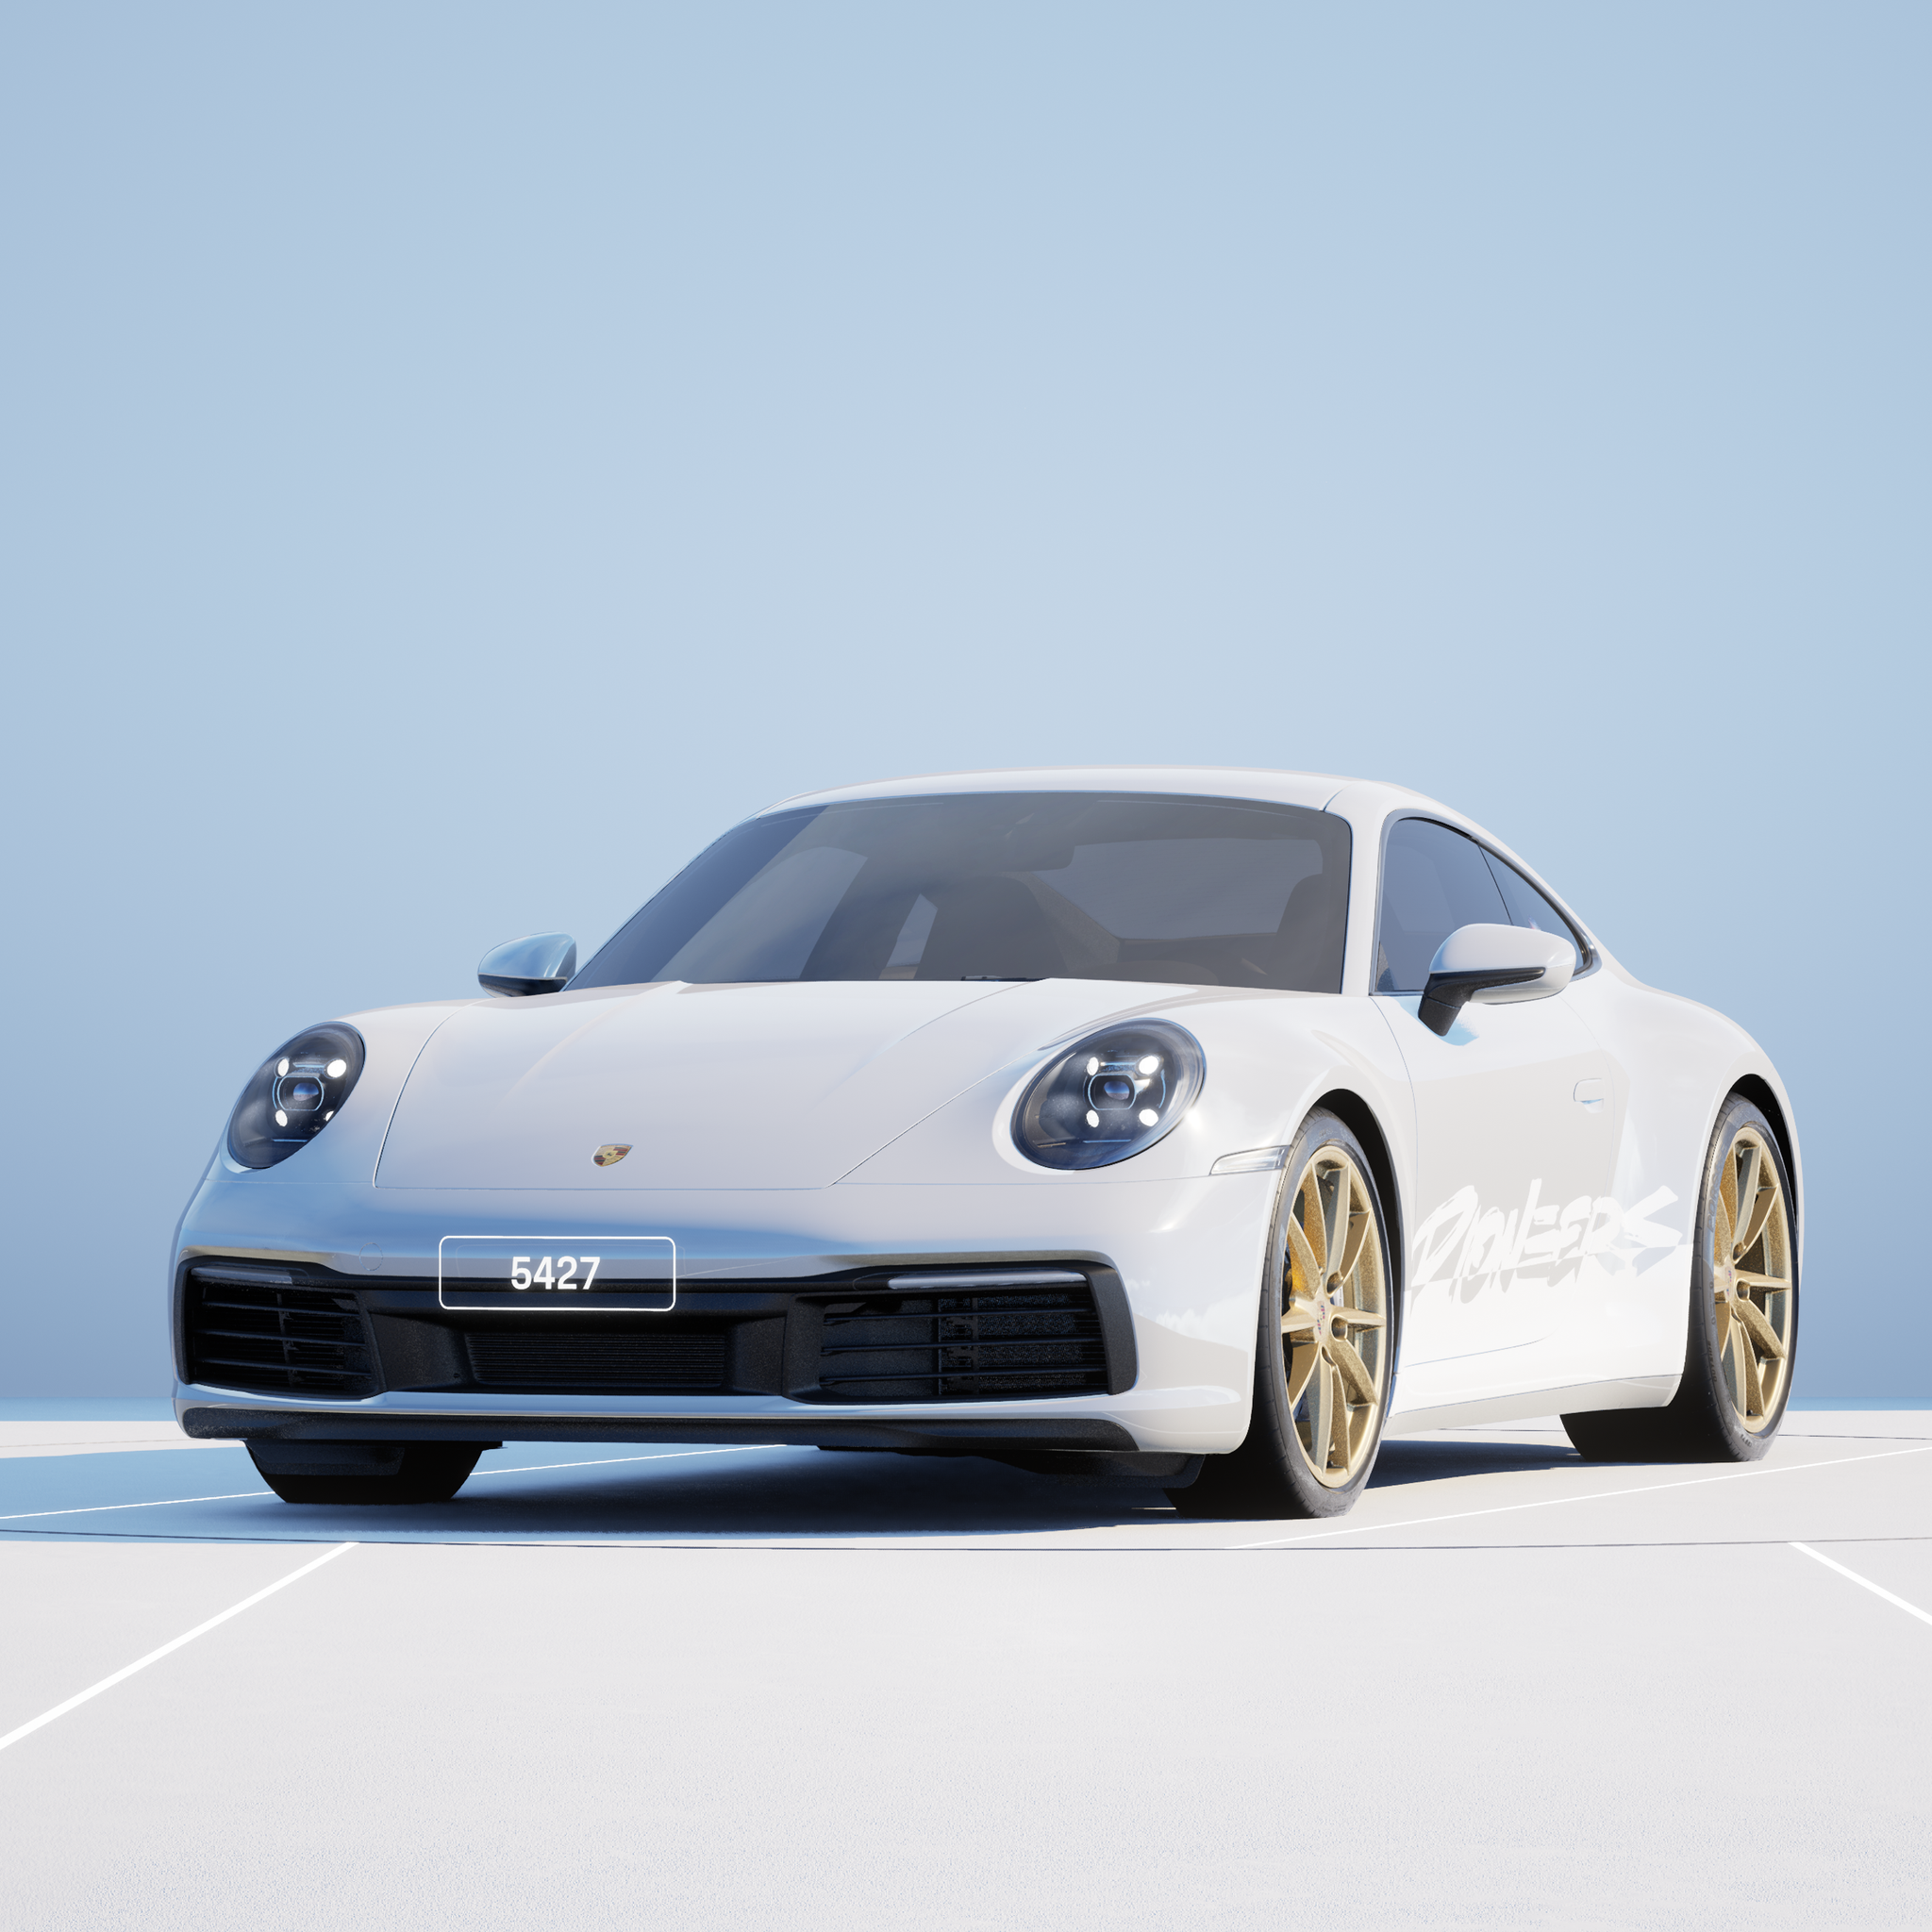 The PORSCHΞ 911 5427 image in phase